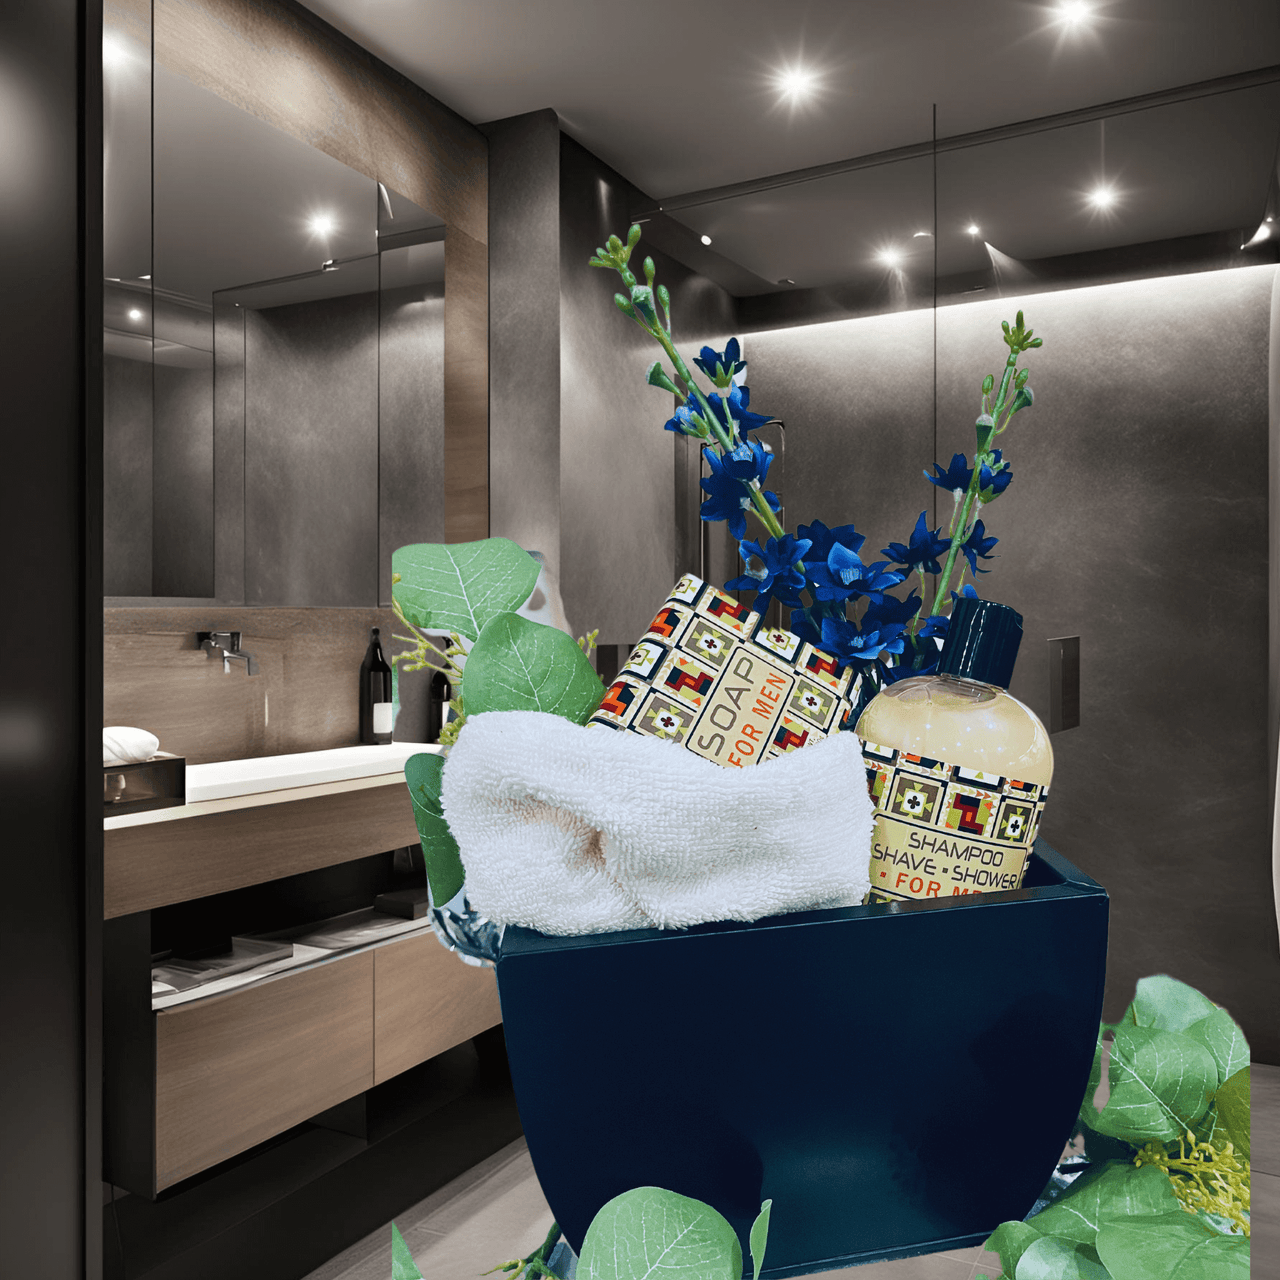 Contemporary men's grooming essentials arranged in a modern bathroom, featuring a sleek shower vase with vibrant floral accents.